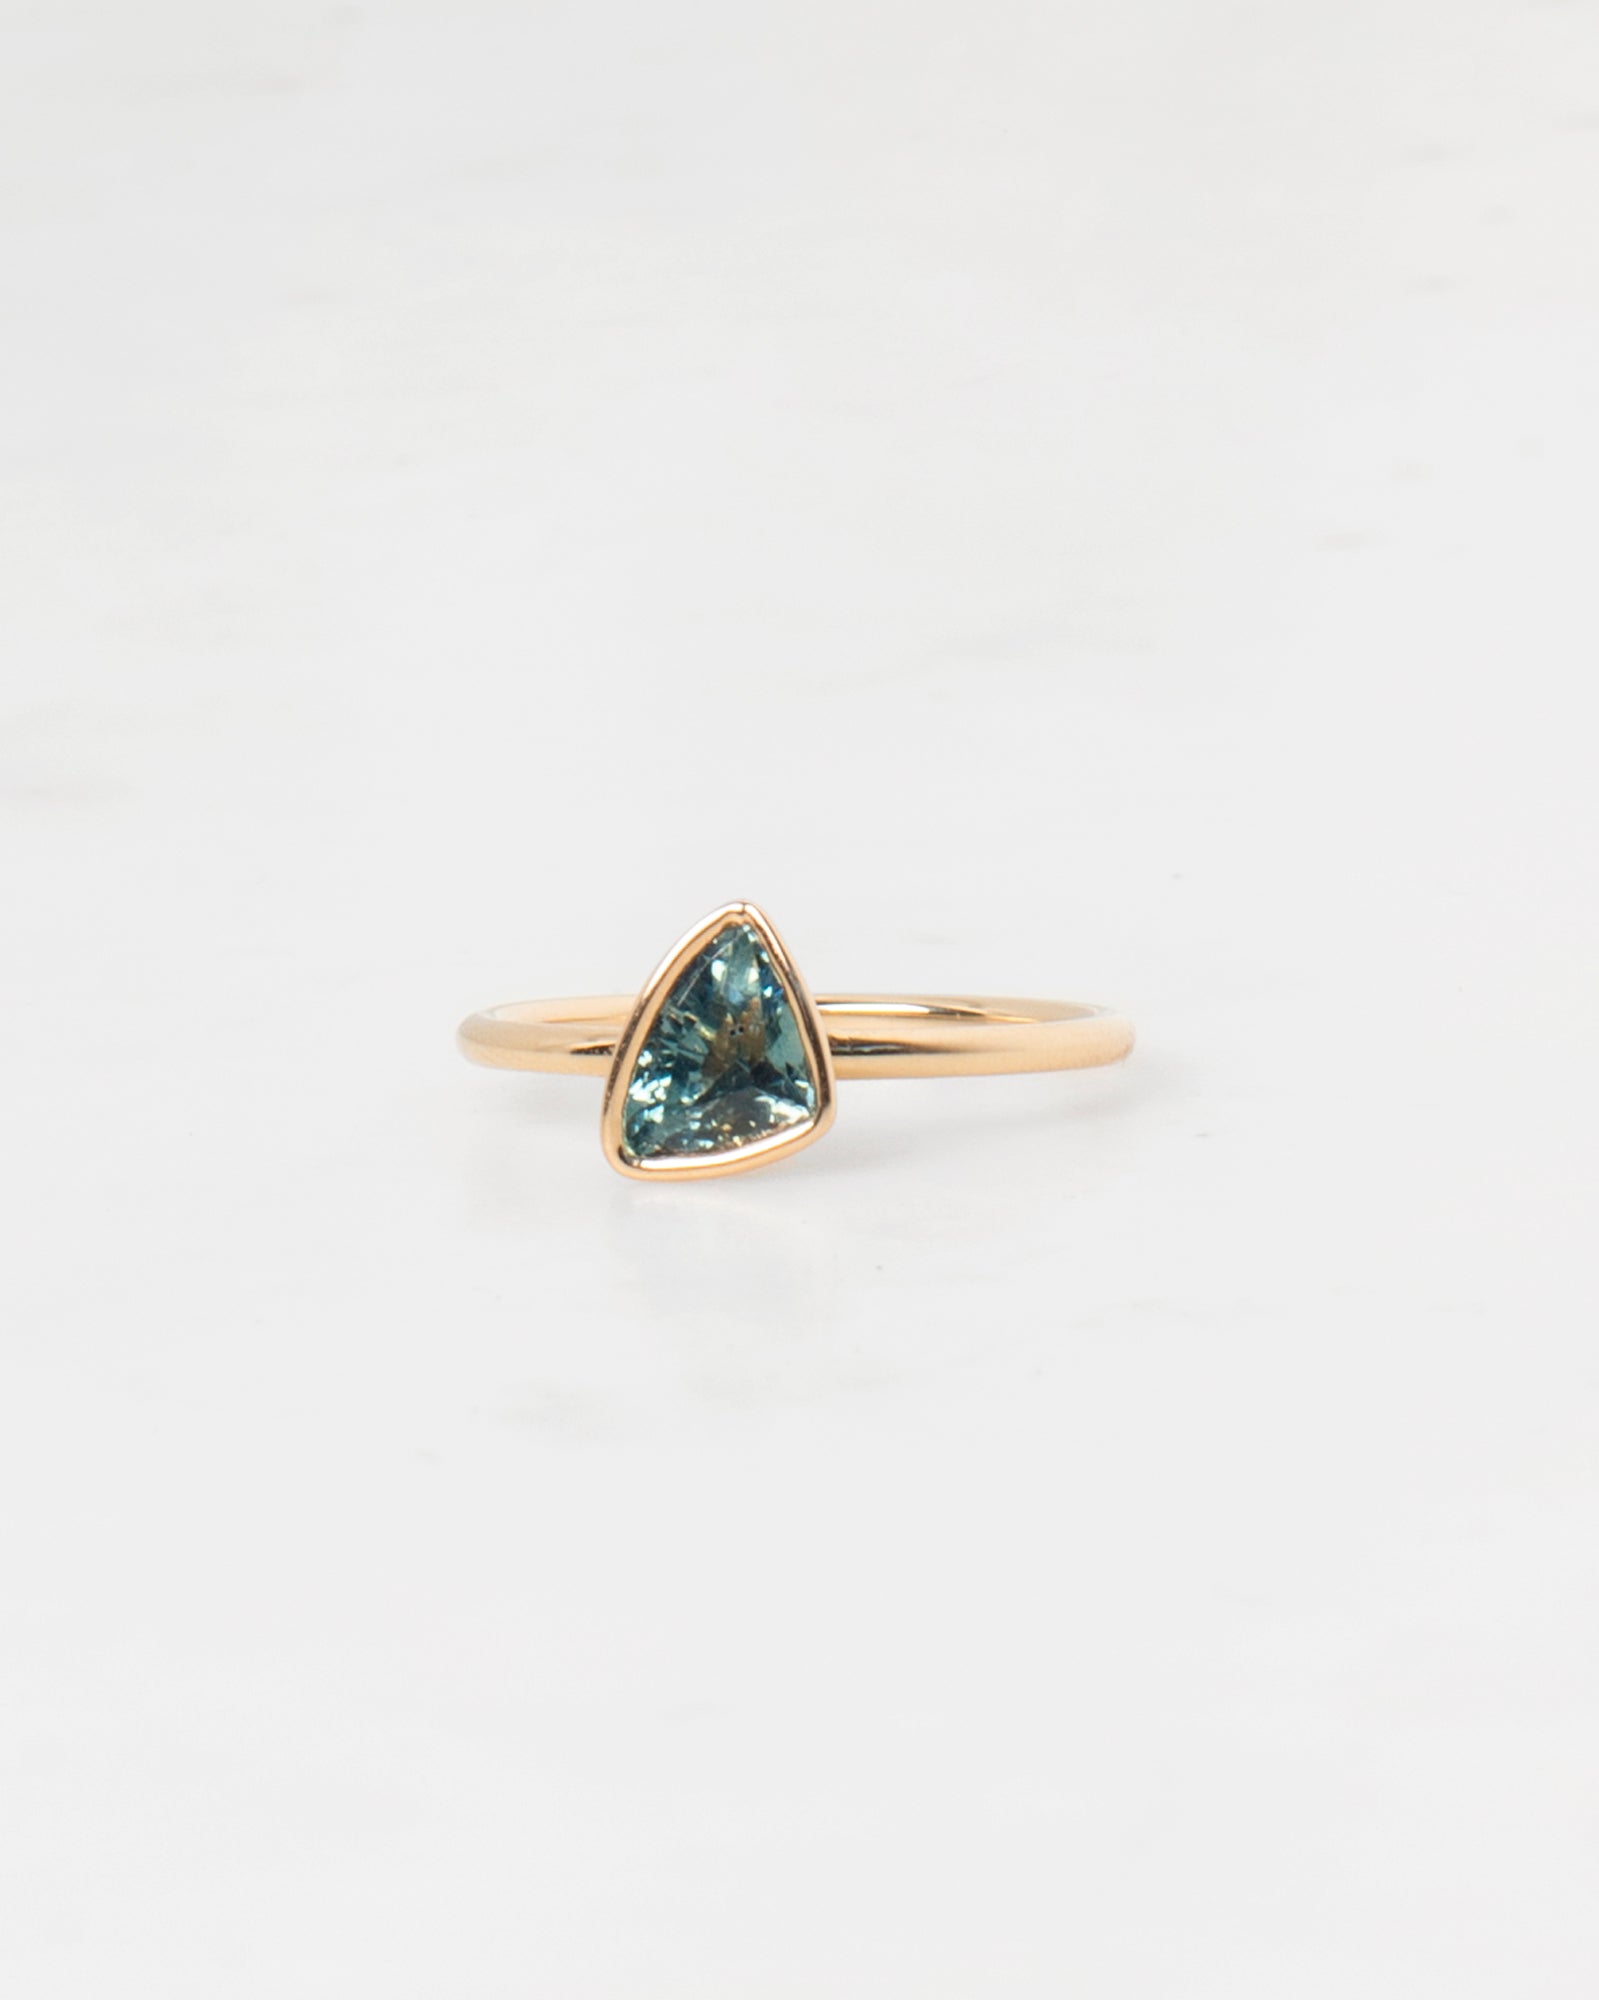 Teal Trillion Cut Floating Sapphire Ring